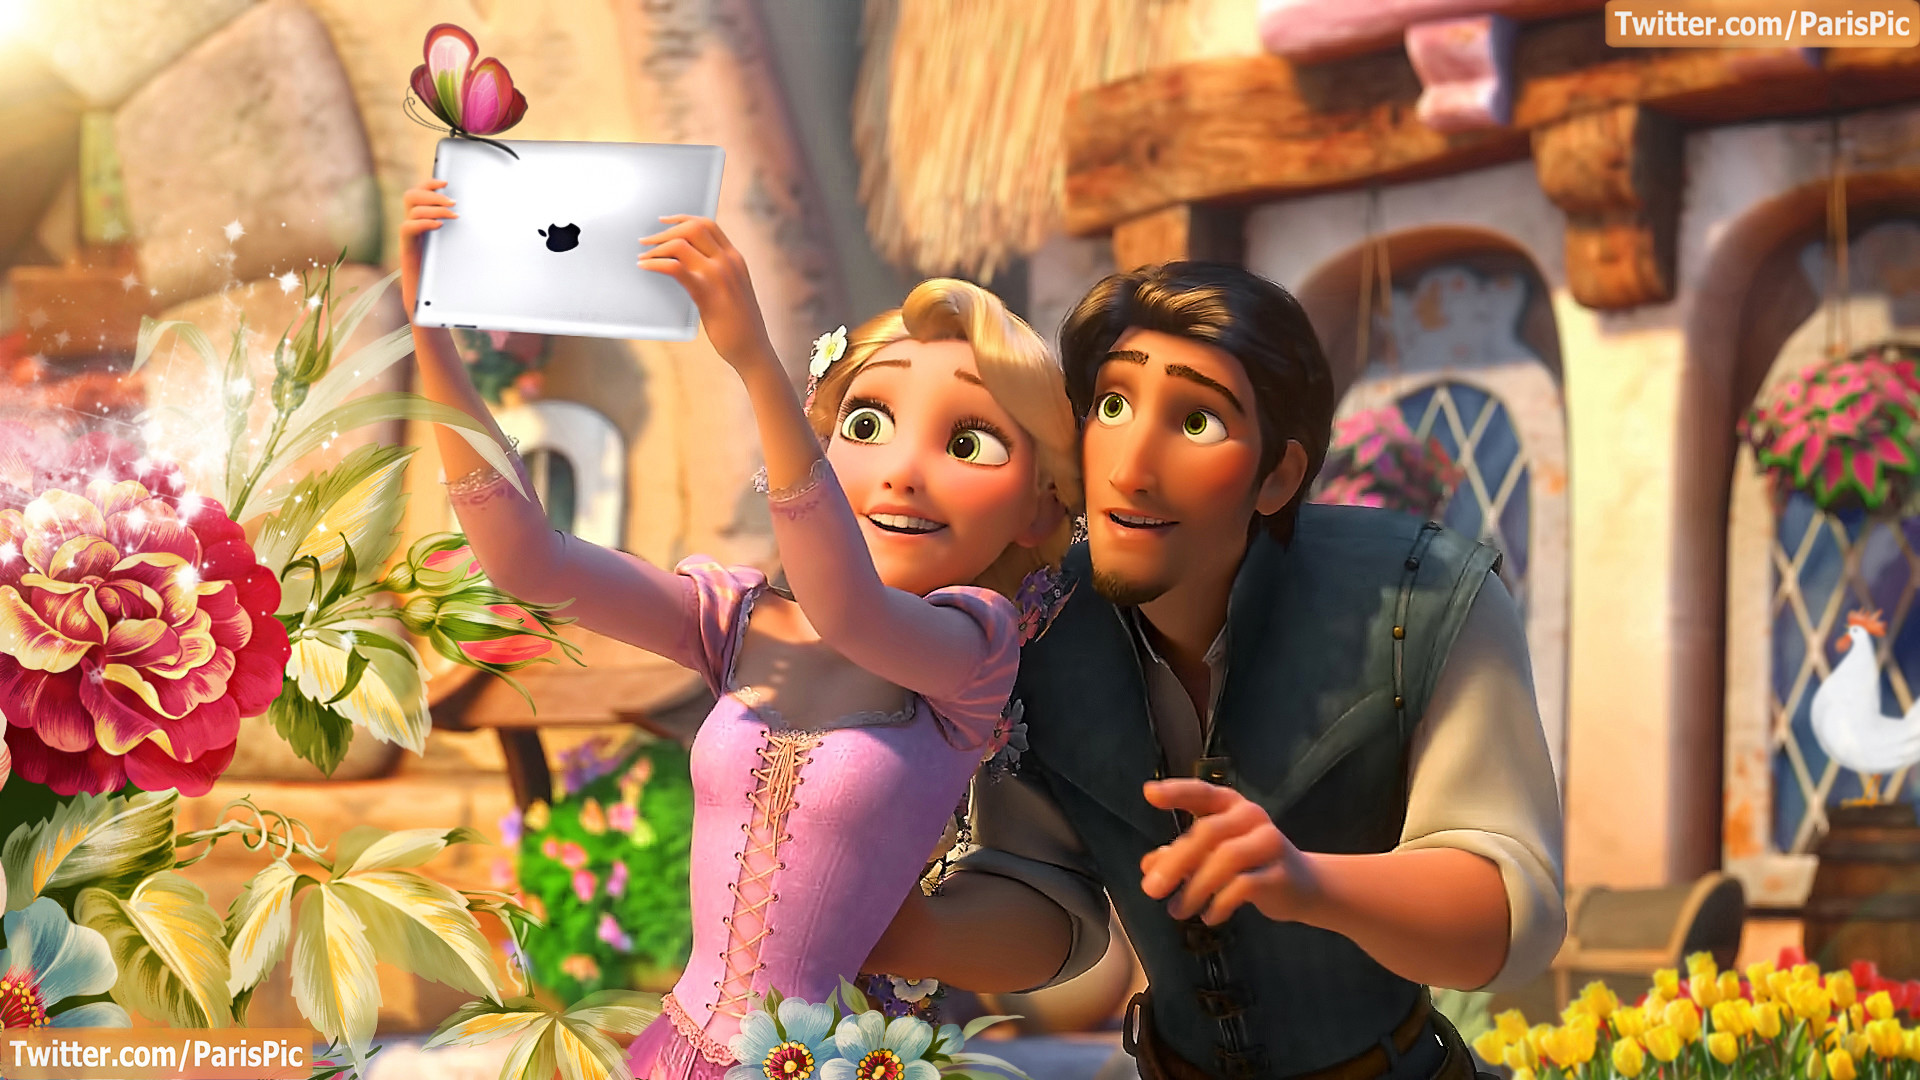 WallpapersWidecom  High Resolution Desktop Wallpapers tagged with tangled  movie rapunzel  Page 1